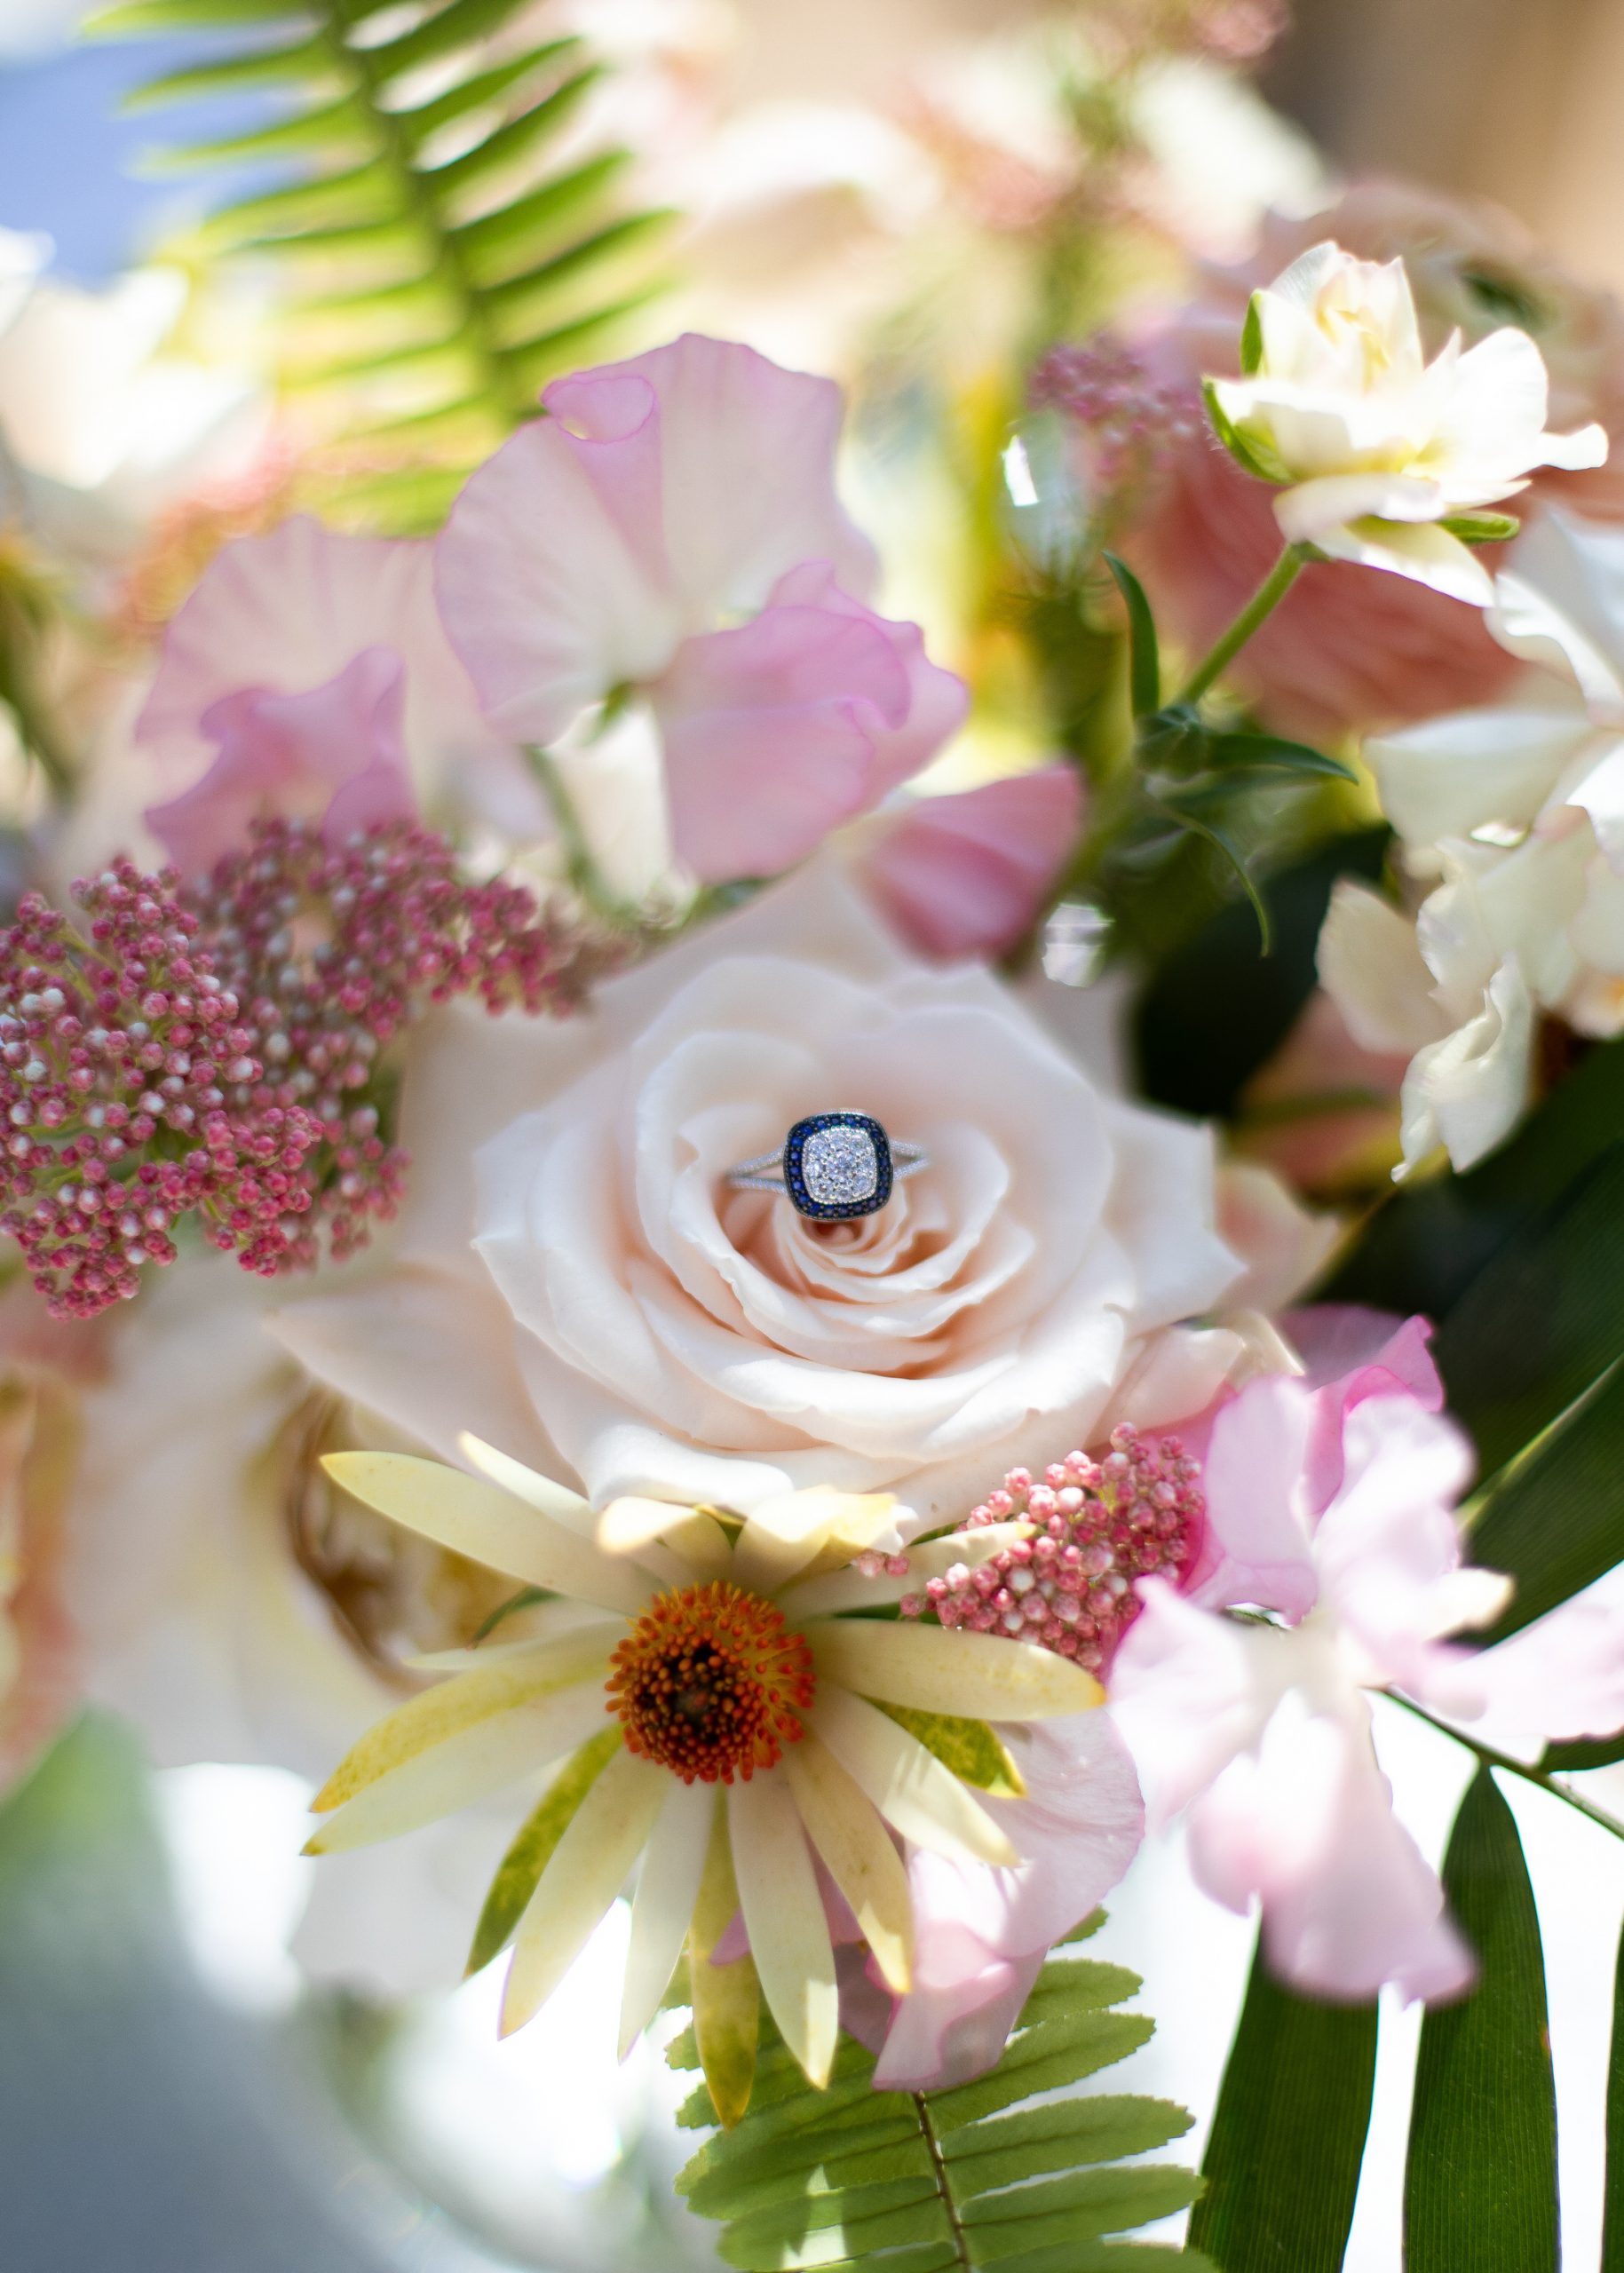 Wedding ring details in tropical bridal bouquet.